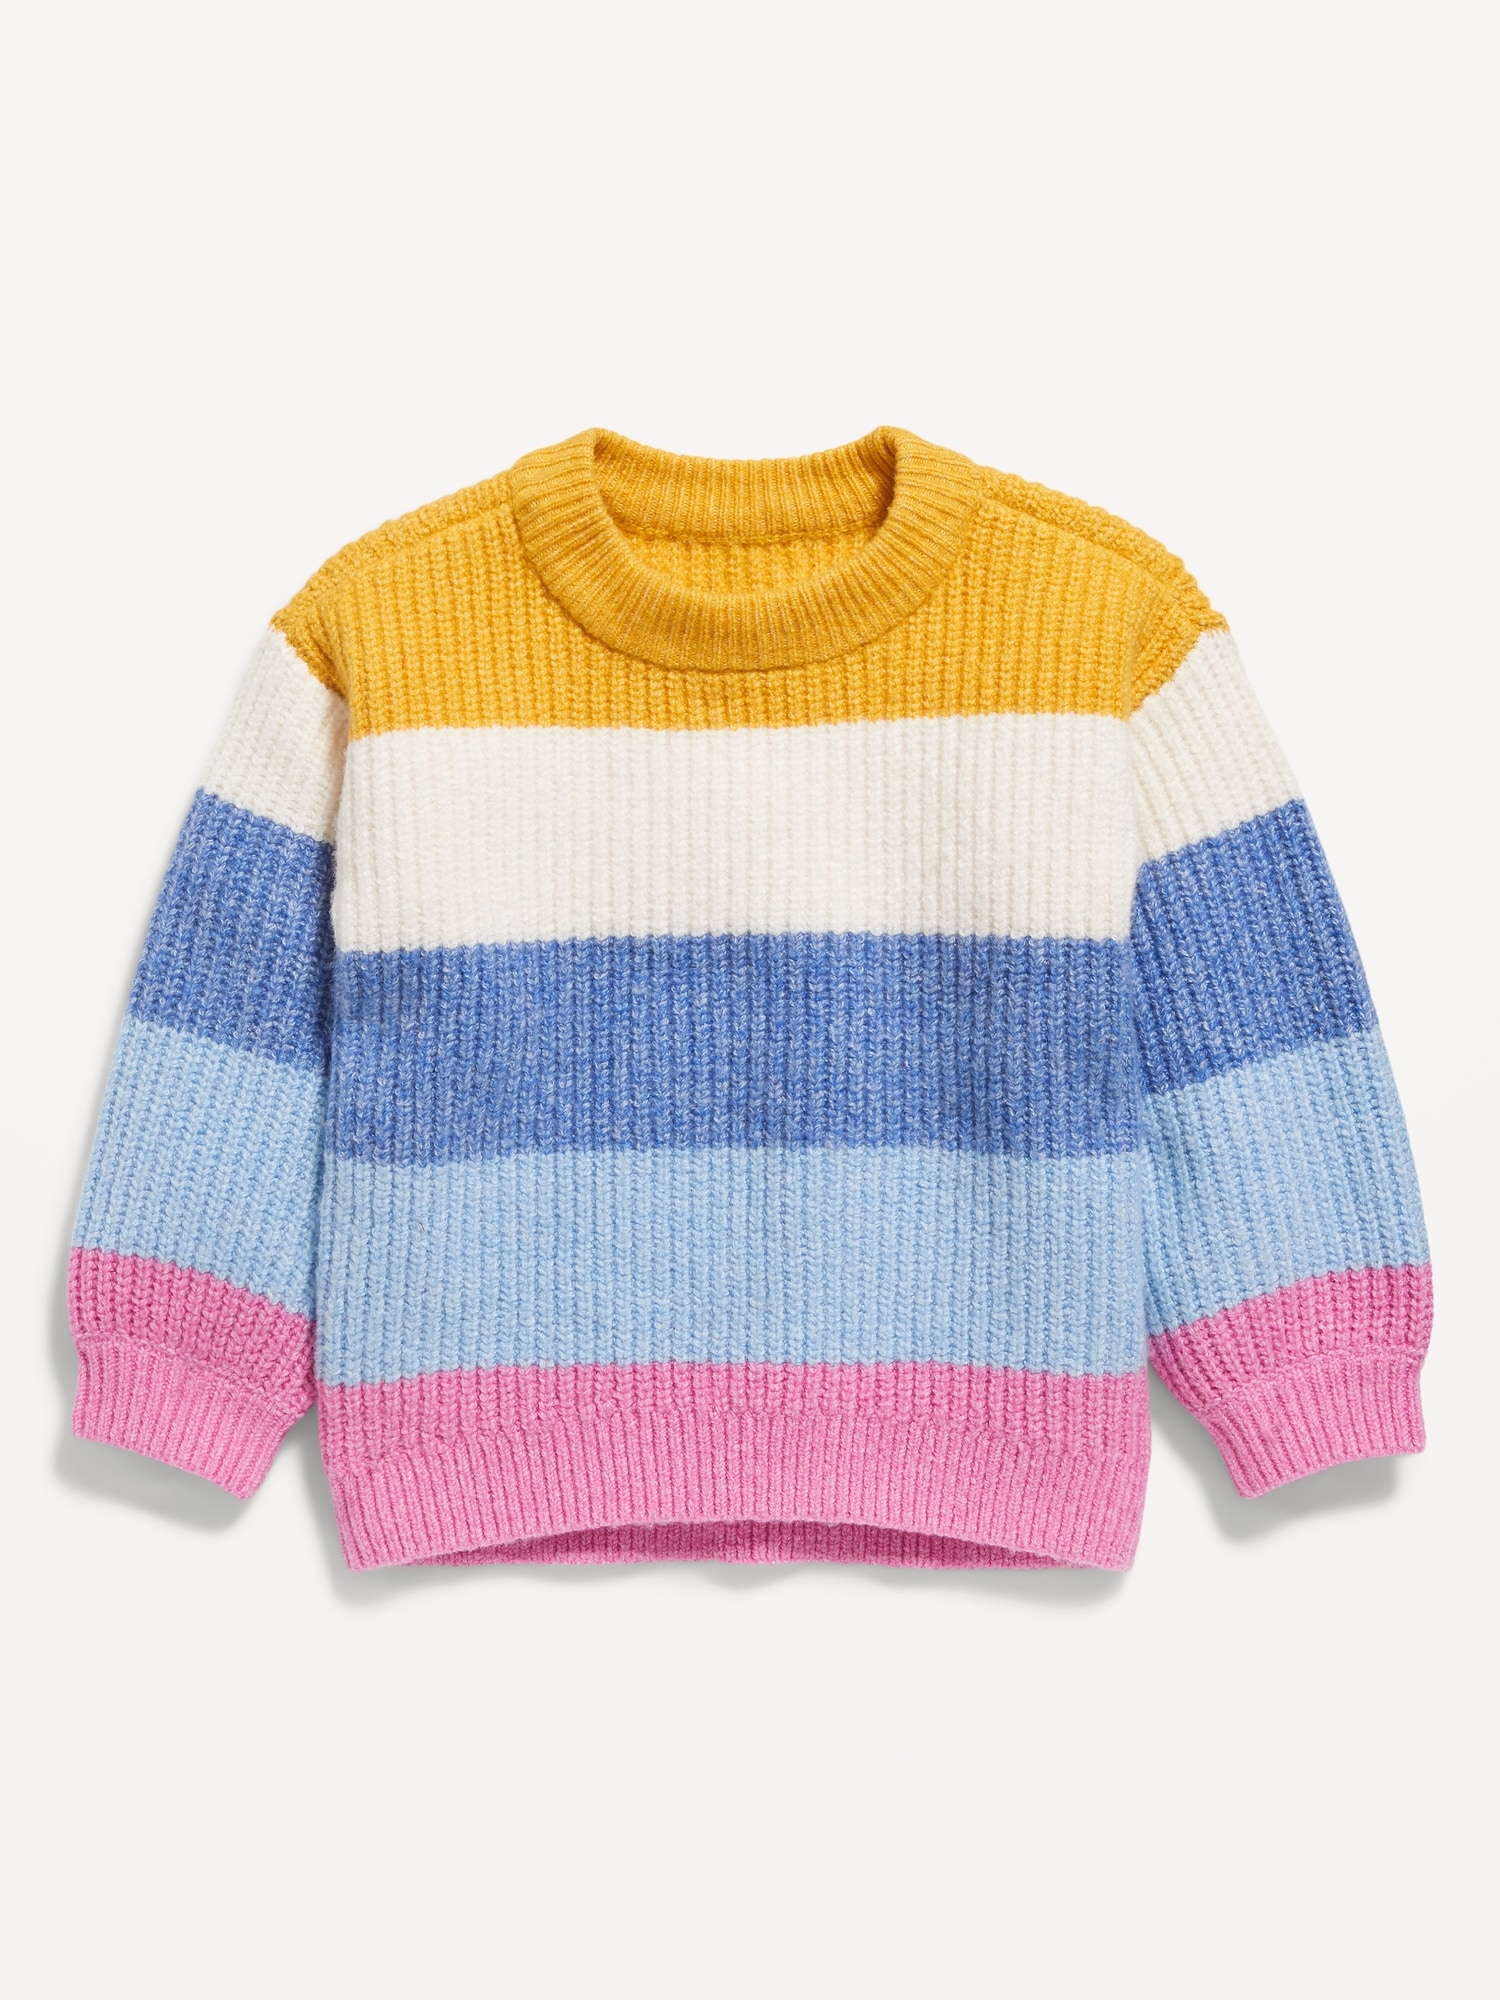 Striped Pullover Sweater for Toddler Girls | Old Navy